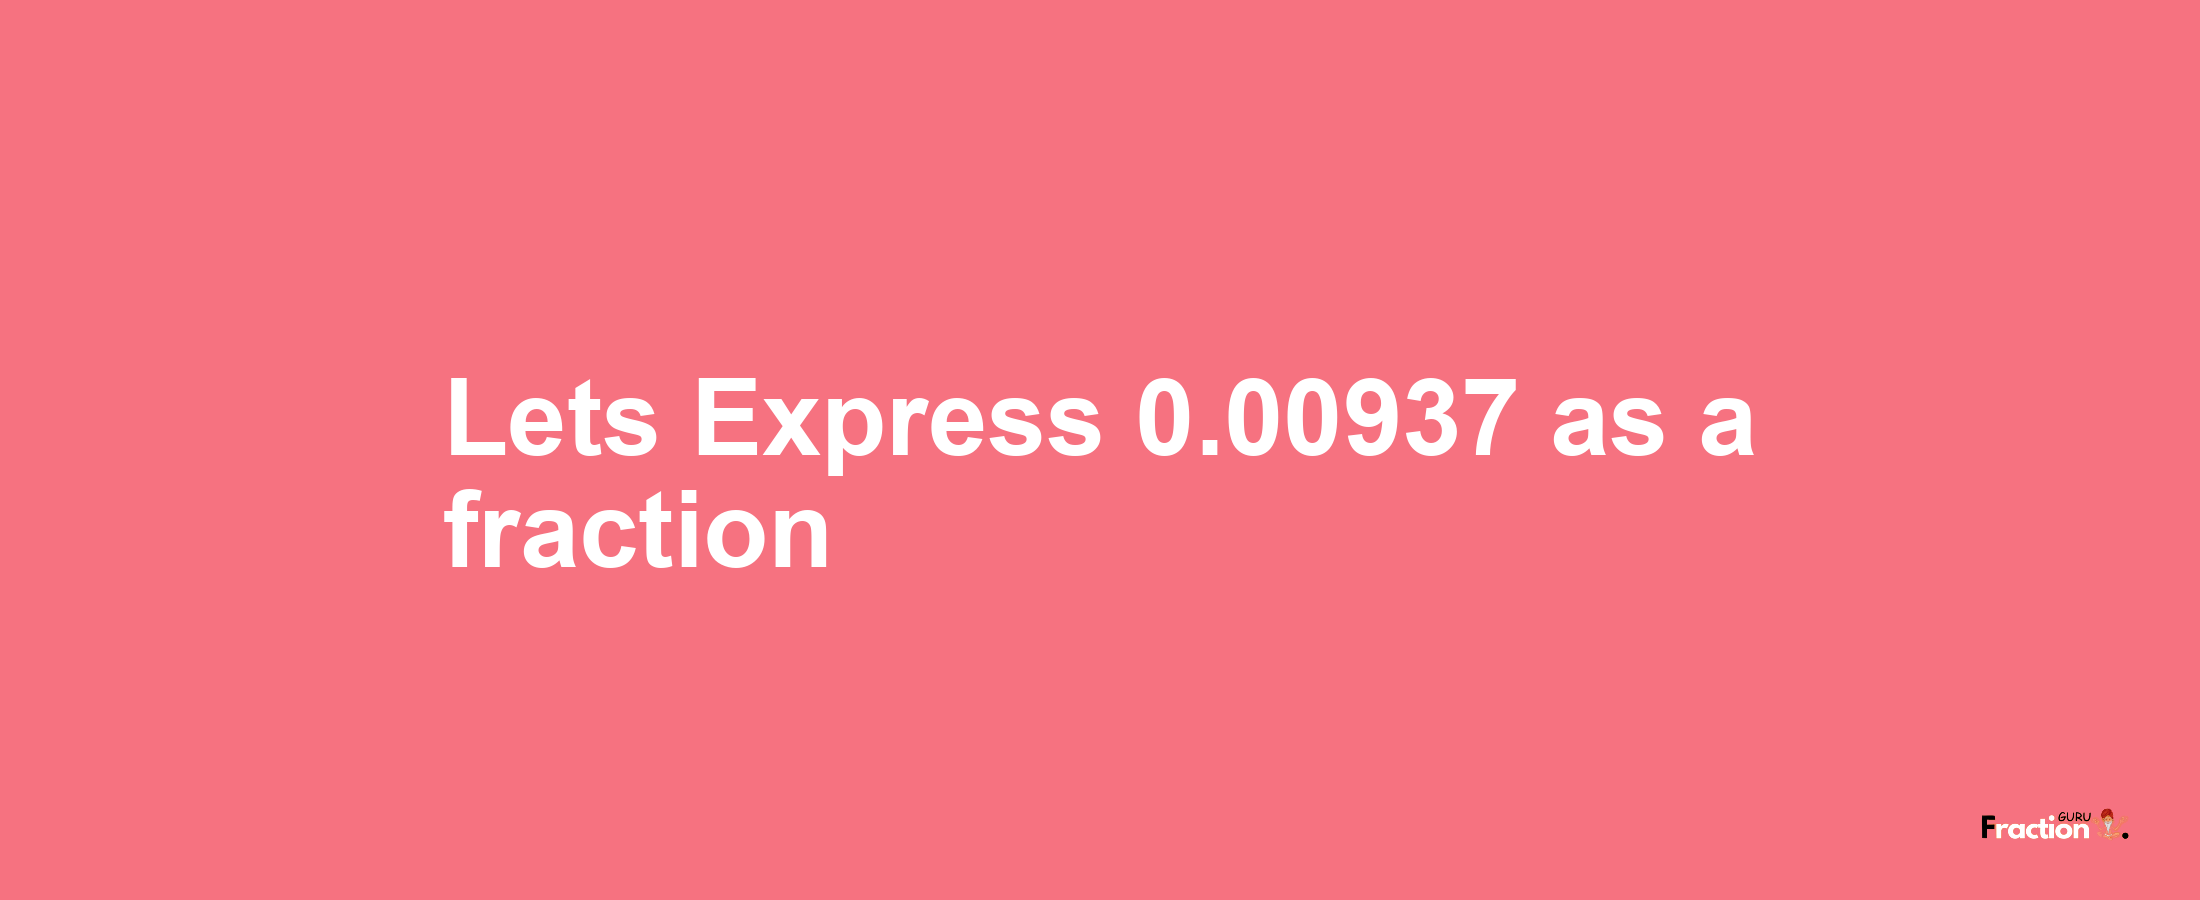 Lets Express 0.00937 as afraction